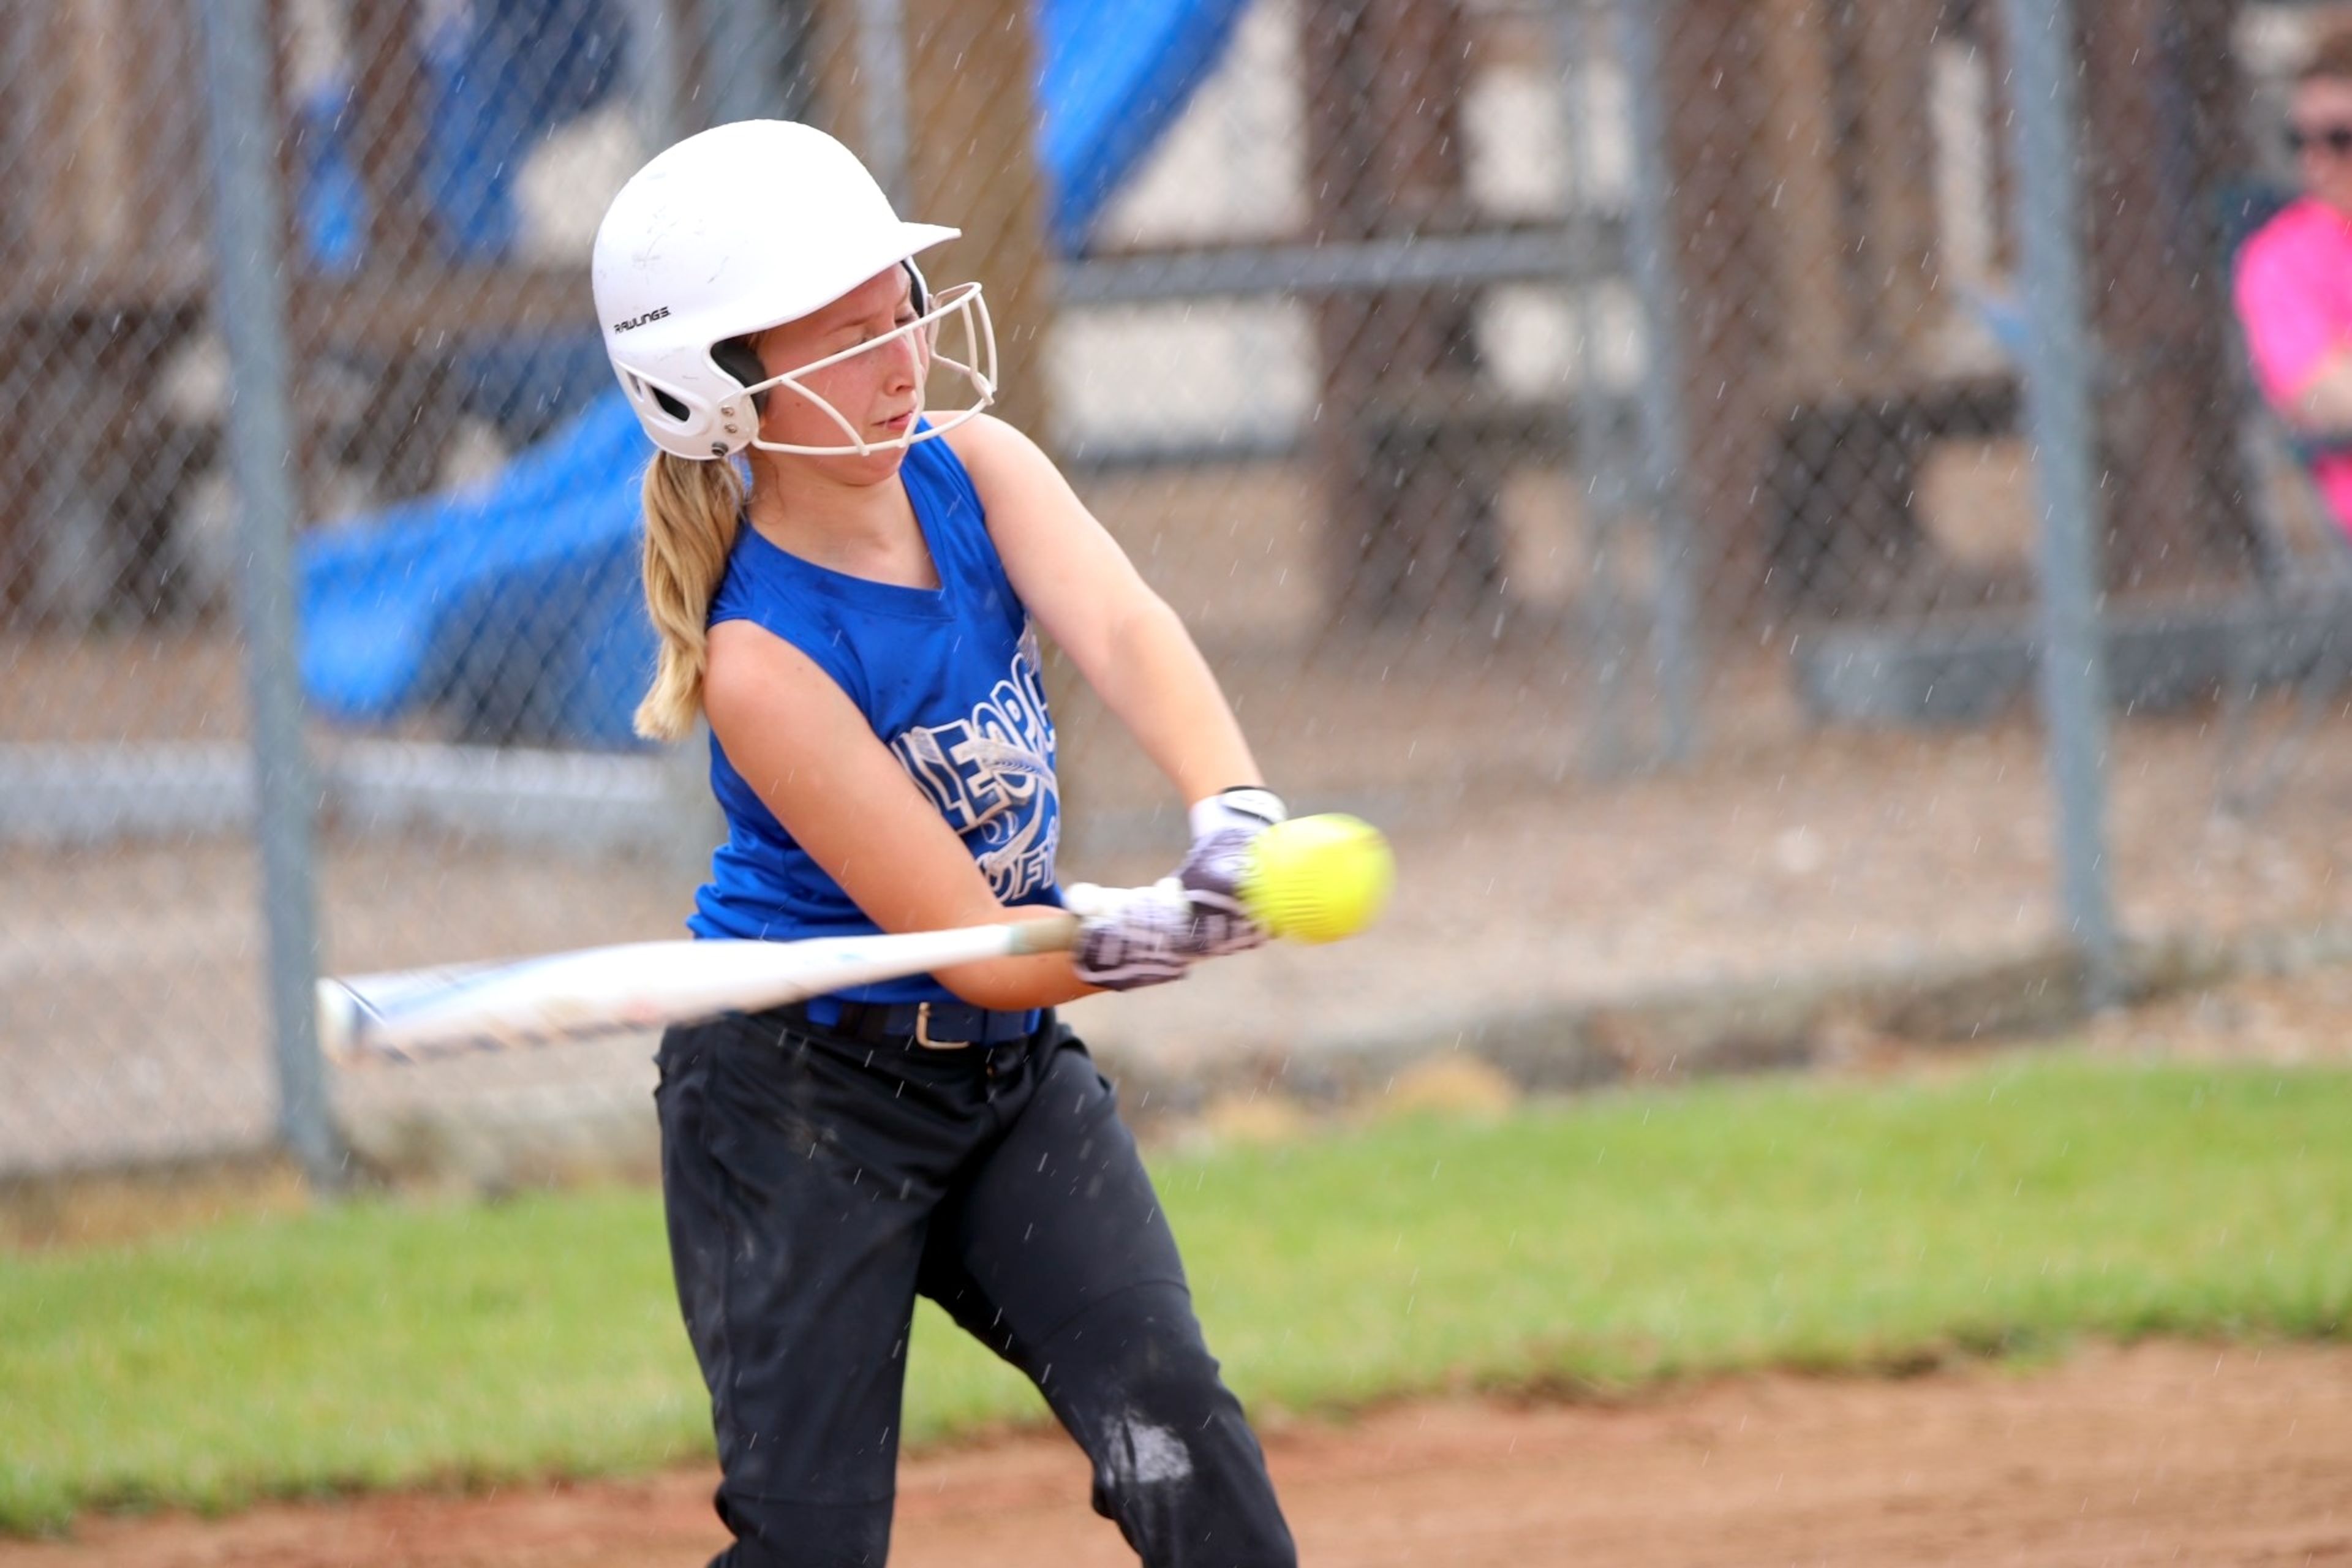 
Nellie Langston gets a solid base hit during her softball game against Marble Hill.